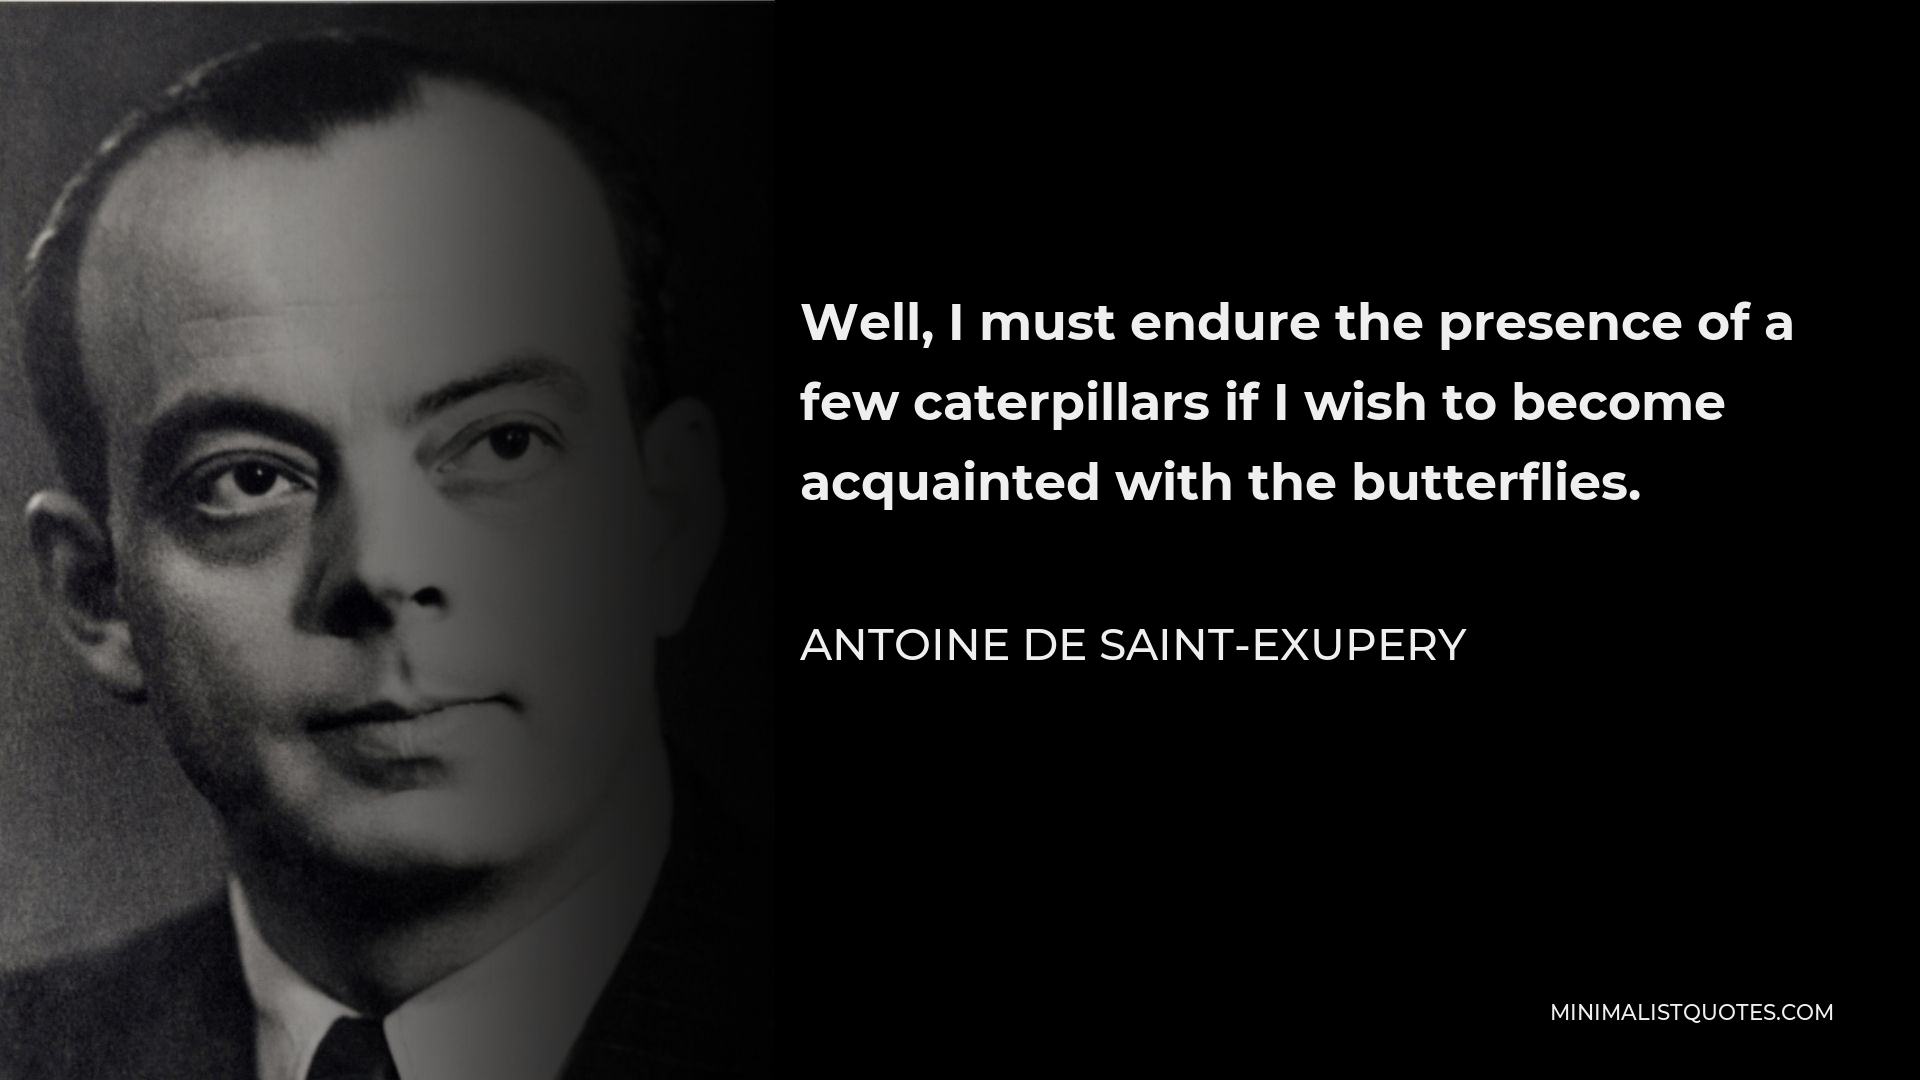 Antoine de Saint-Exupery Quote - Well, I must endure the presence of a few caterpillars if I wish to become acquainted with the butterflies.